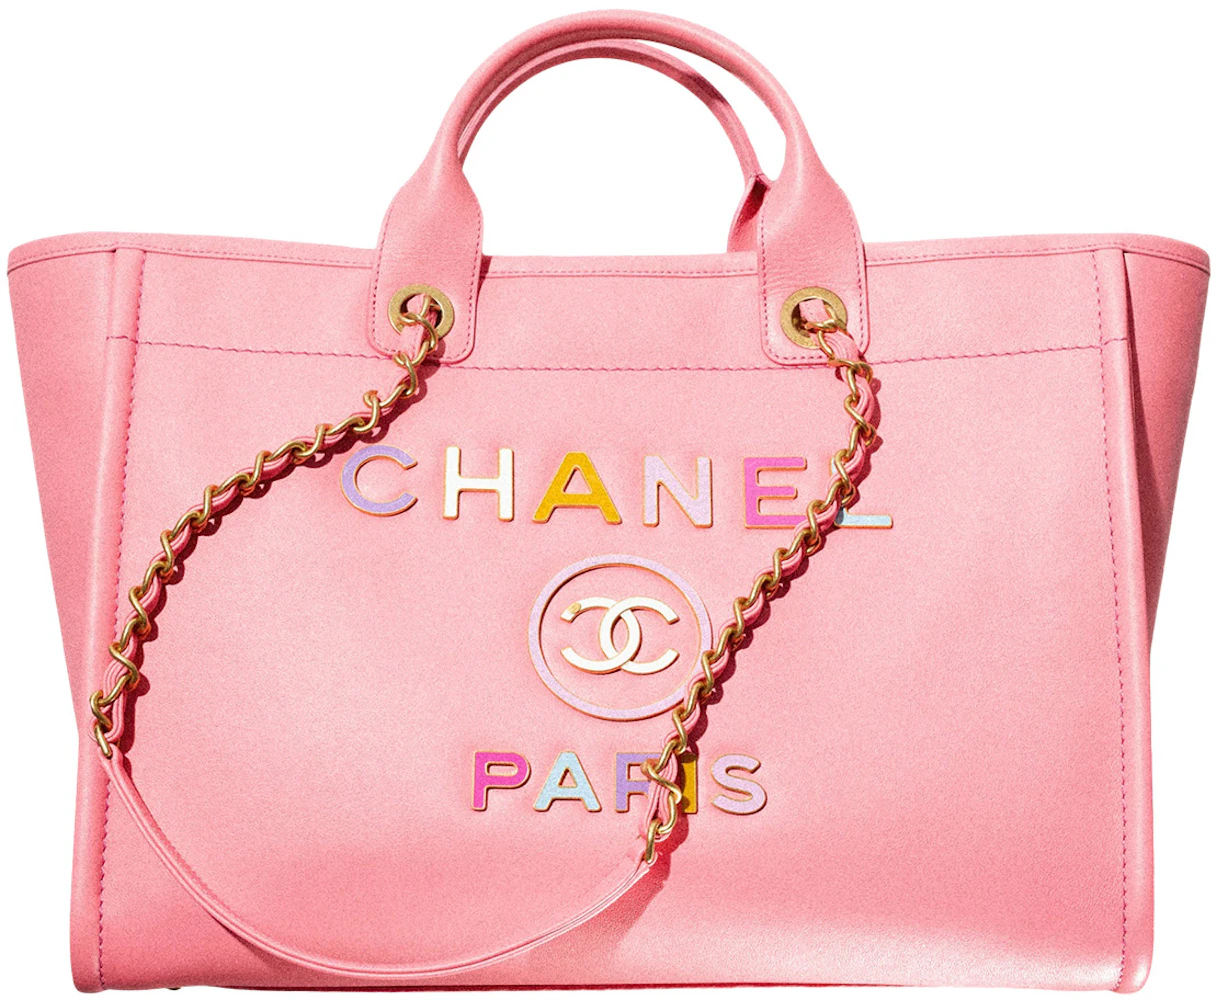 Chanel High Summer Large Tote Bag 